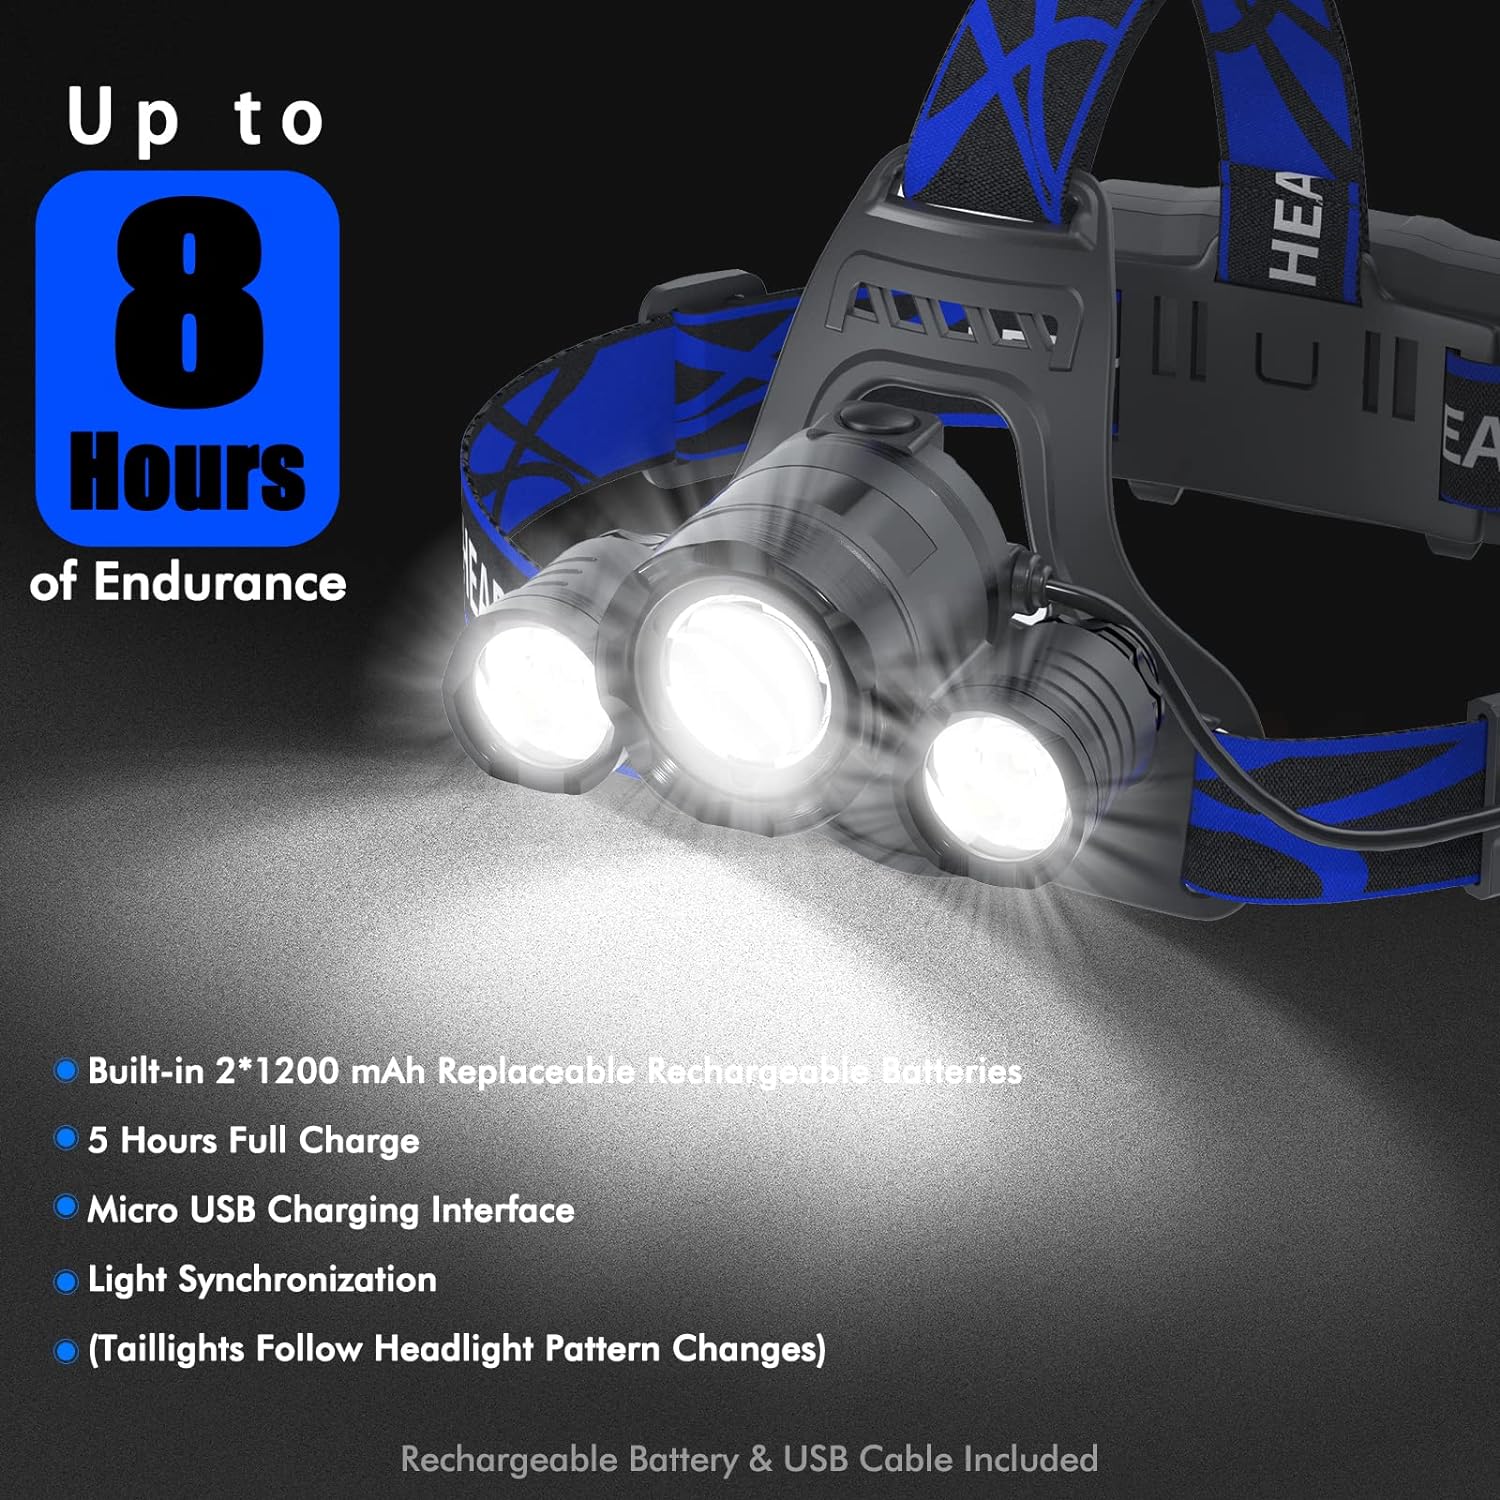 Headlamp Rechargeable USB Headlamps 6000 High Lumens Super Brightest Head Lamp for Adluts Kids Waterproof Headlight 4 Modes Lightweight Head Lights for Outdoor Camping Hunting Running Hiking(Blue)